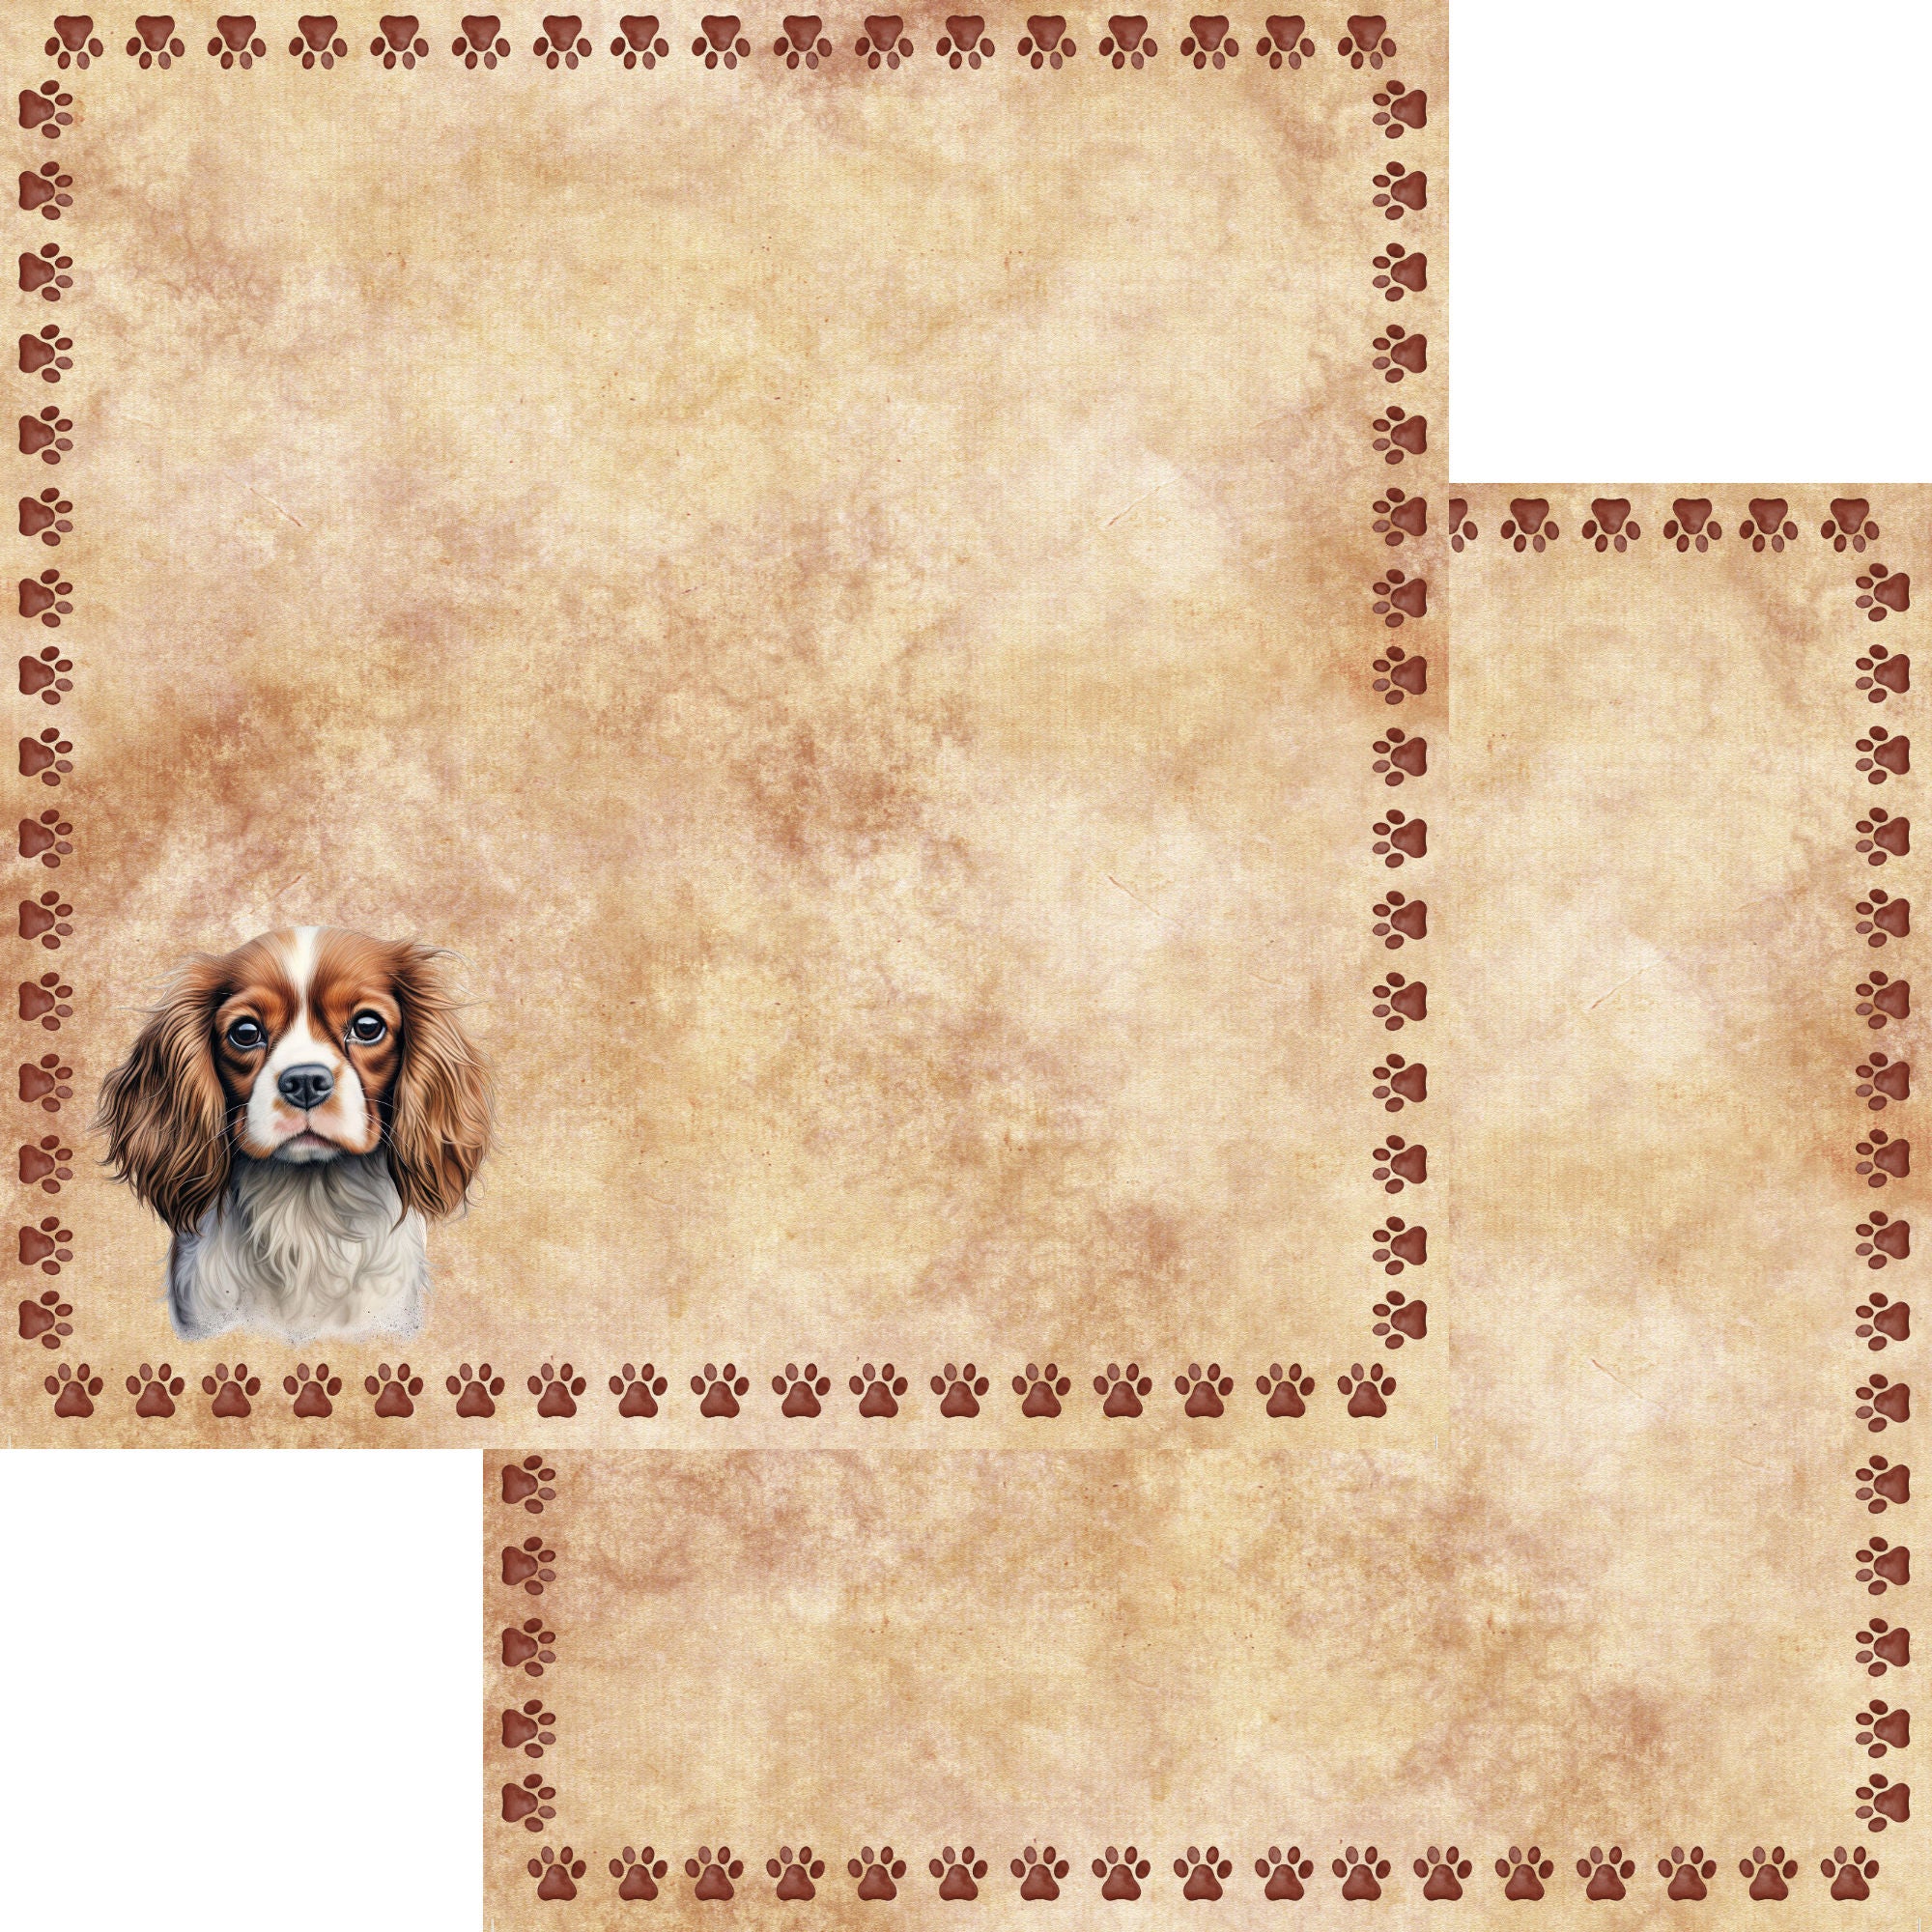 Dog Breeds Collection Cavalier King Charles Spaniel 12 x 12 Double-Sided Scrapbook Paper by SSC Designs